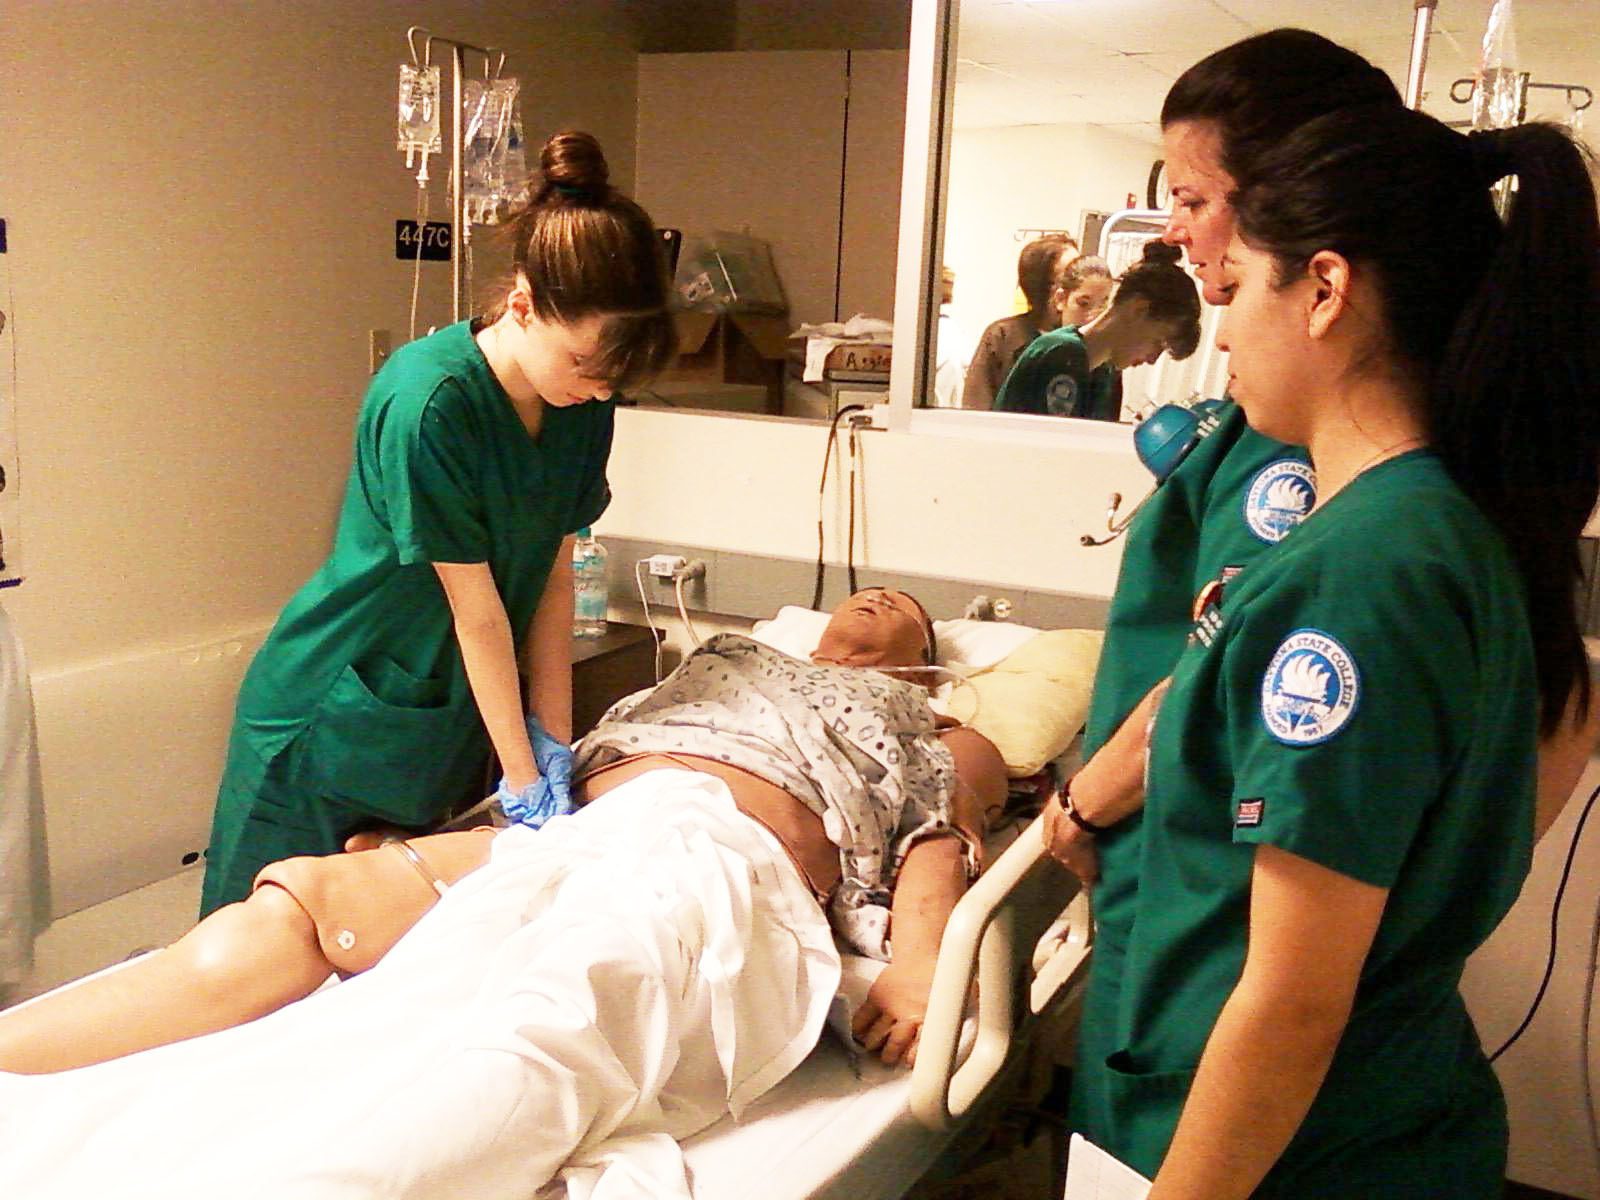 three raspatory therapists standing over patient